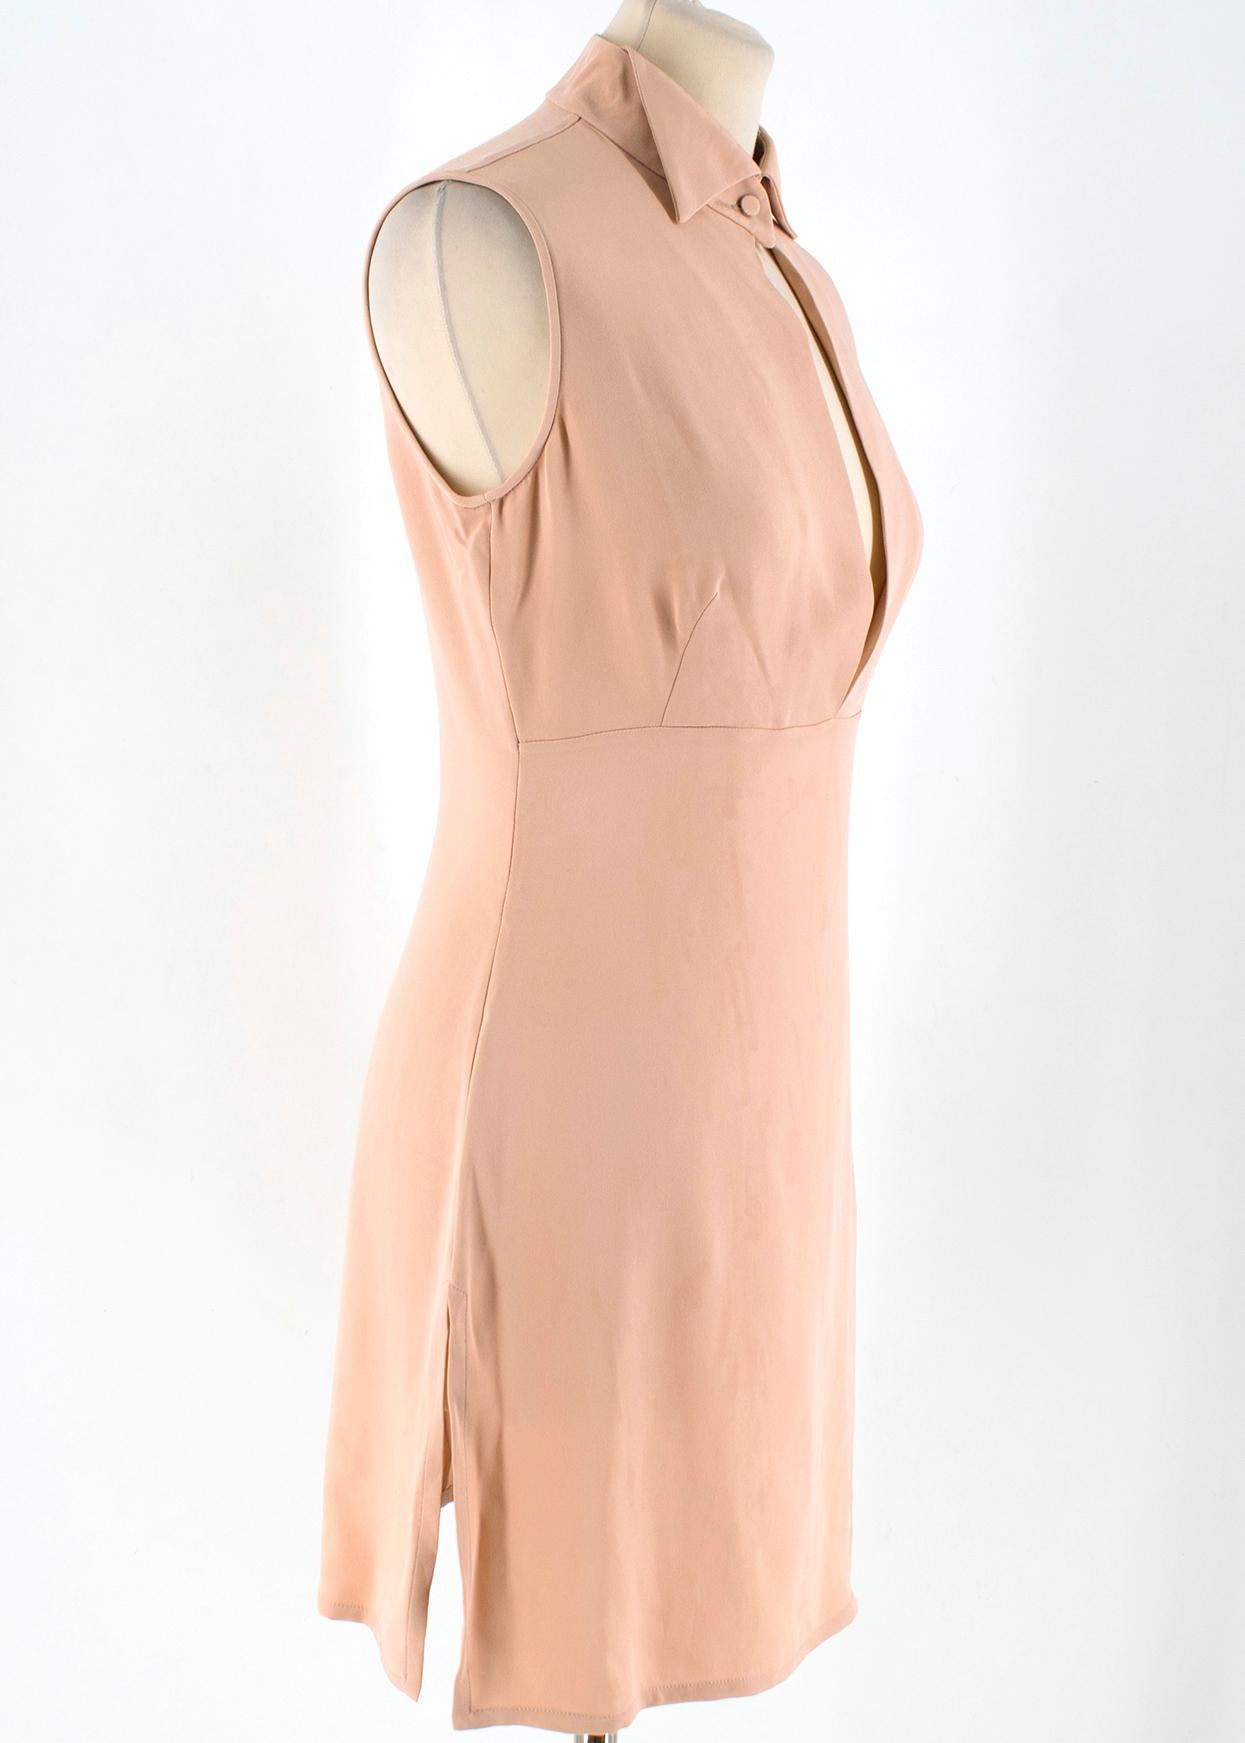 Alexander McQueen Nude Silk Mini Dress

- Nude silk mini dress
- Lightweight
- Plunging v-neck
- Spread collar, single button fastening
- Sleeveless
- Side concealed hook-and-eye and zip fastening
- Side slits
- 100% silk

Please note, these items